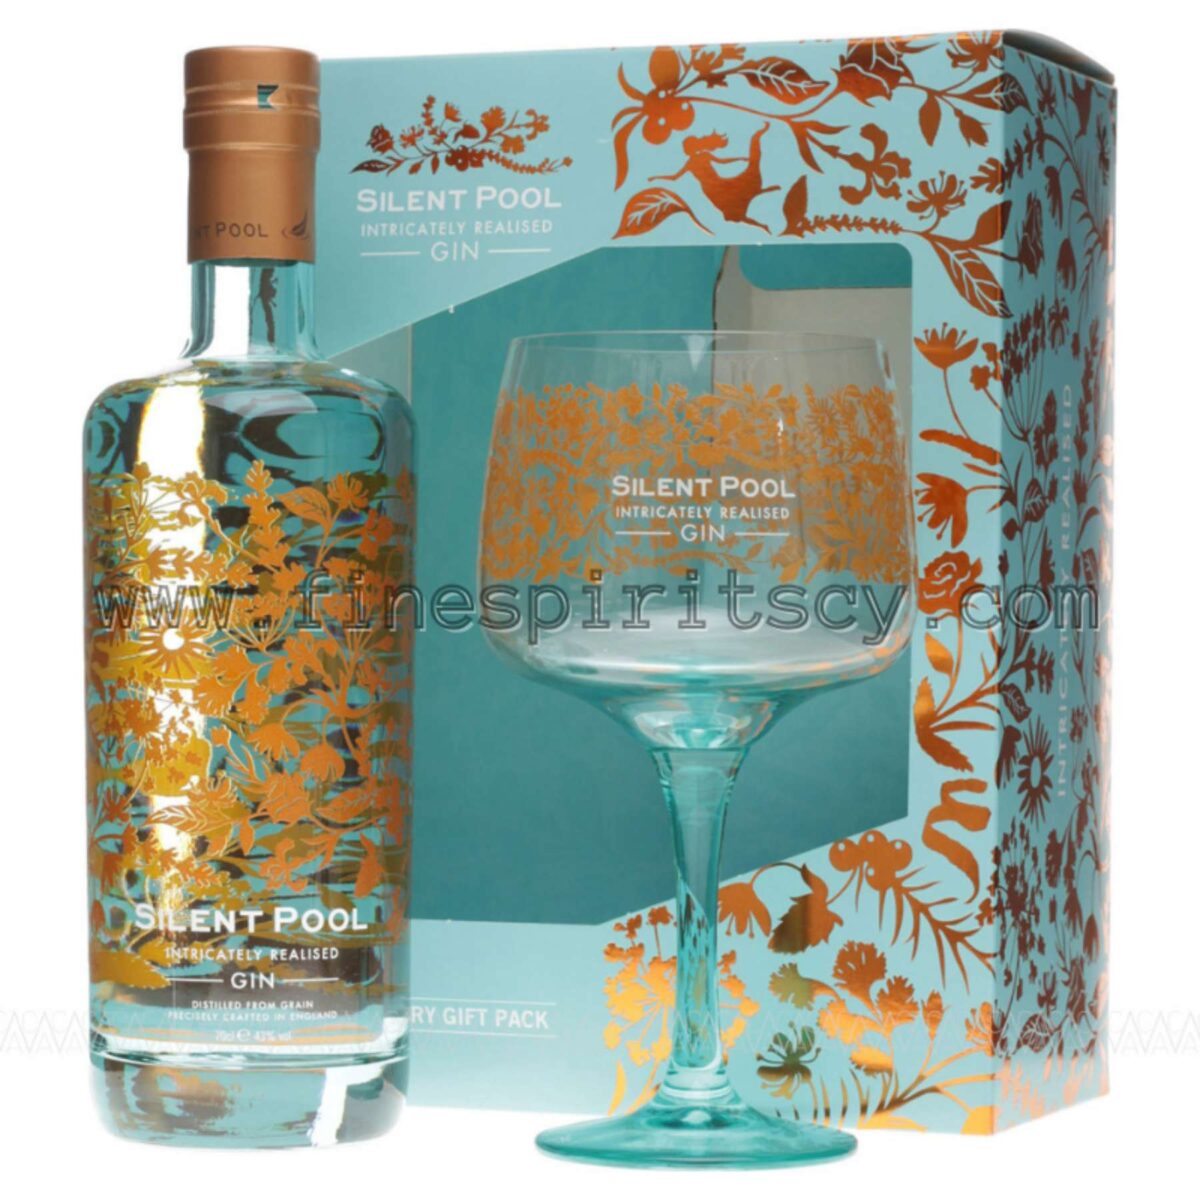 Silent pool gift idea with 1 glass gin box top gin online cyprus fine spirits